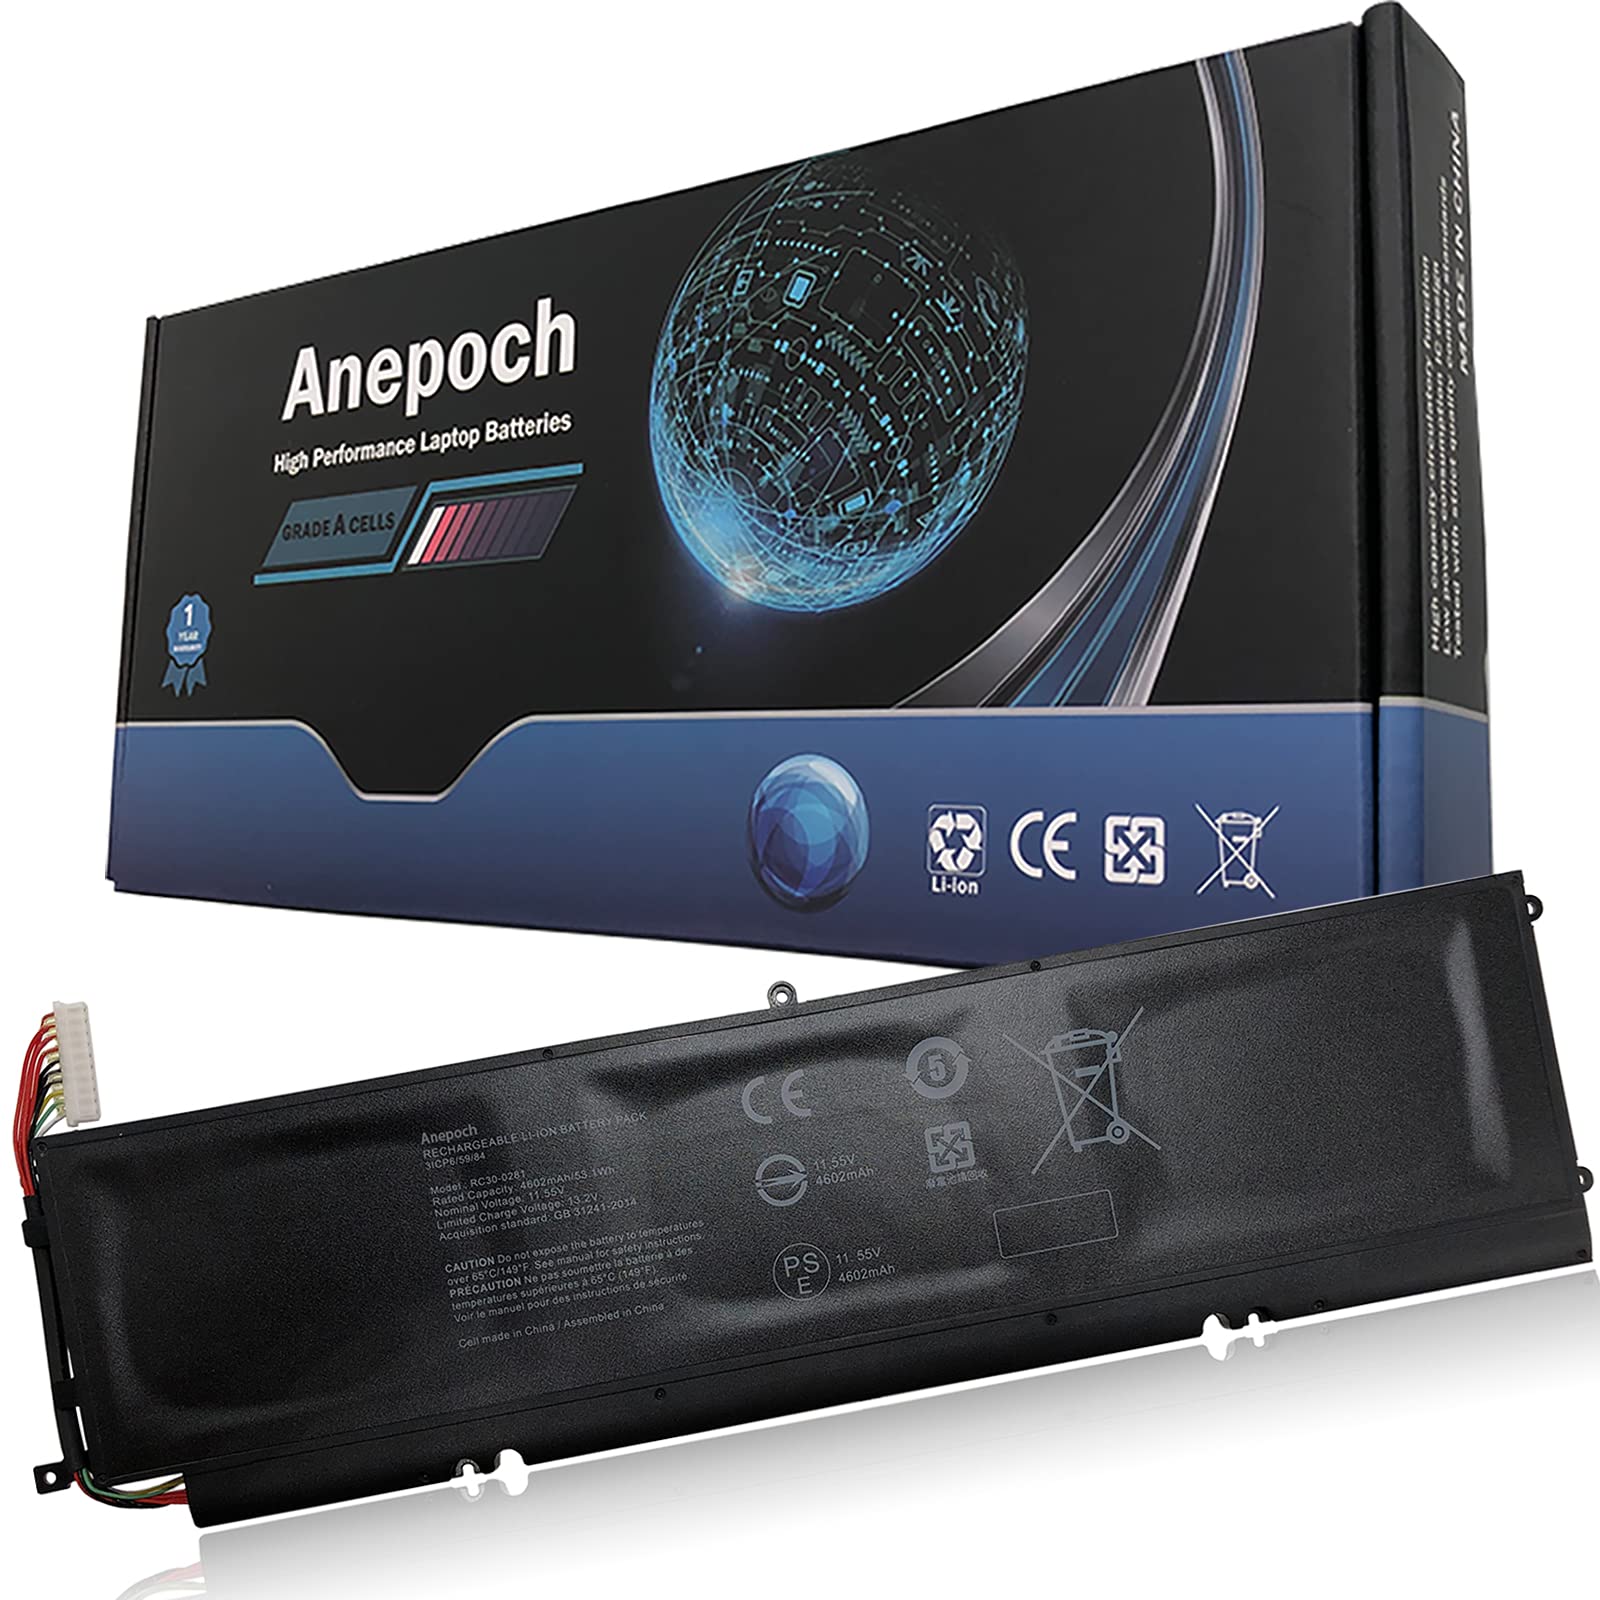 Anepoch RC30-0281 Laptop battery Replacement for Razer Blade Stealth 13.3 Early 2018 2019 Series GTX1650 i7-8565U i7-1065G7 RZ09-0281 02810 02812 R...